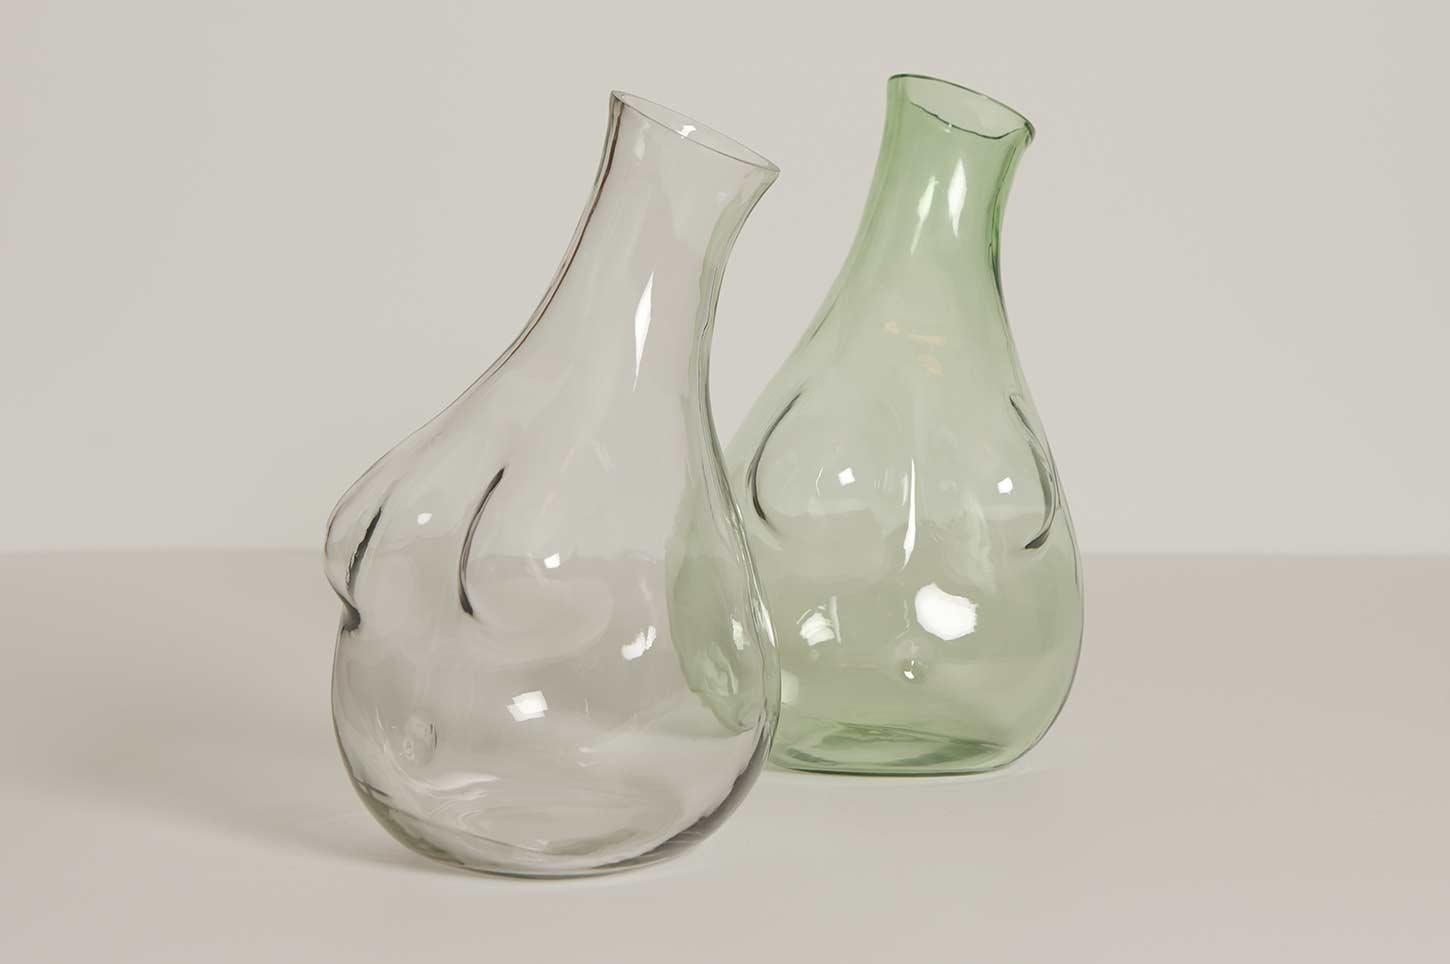 Made from hand-blown glass to hold water, wine or anything you else you fancy.

Capacity: 1750ml / 60 oz. When ordering, please specify clear or green glass.